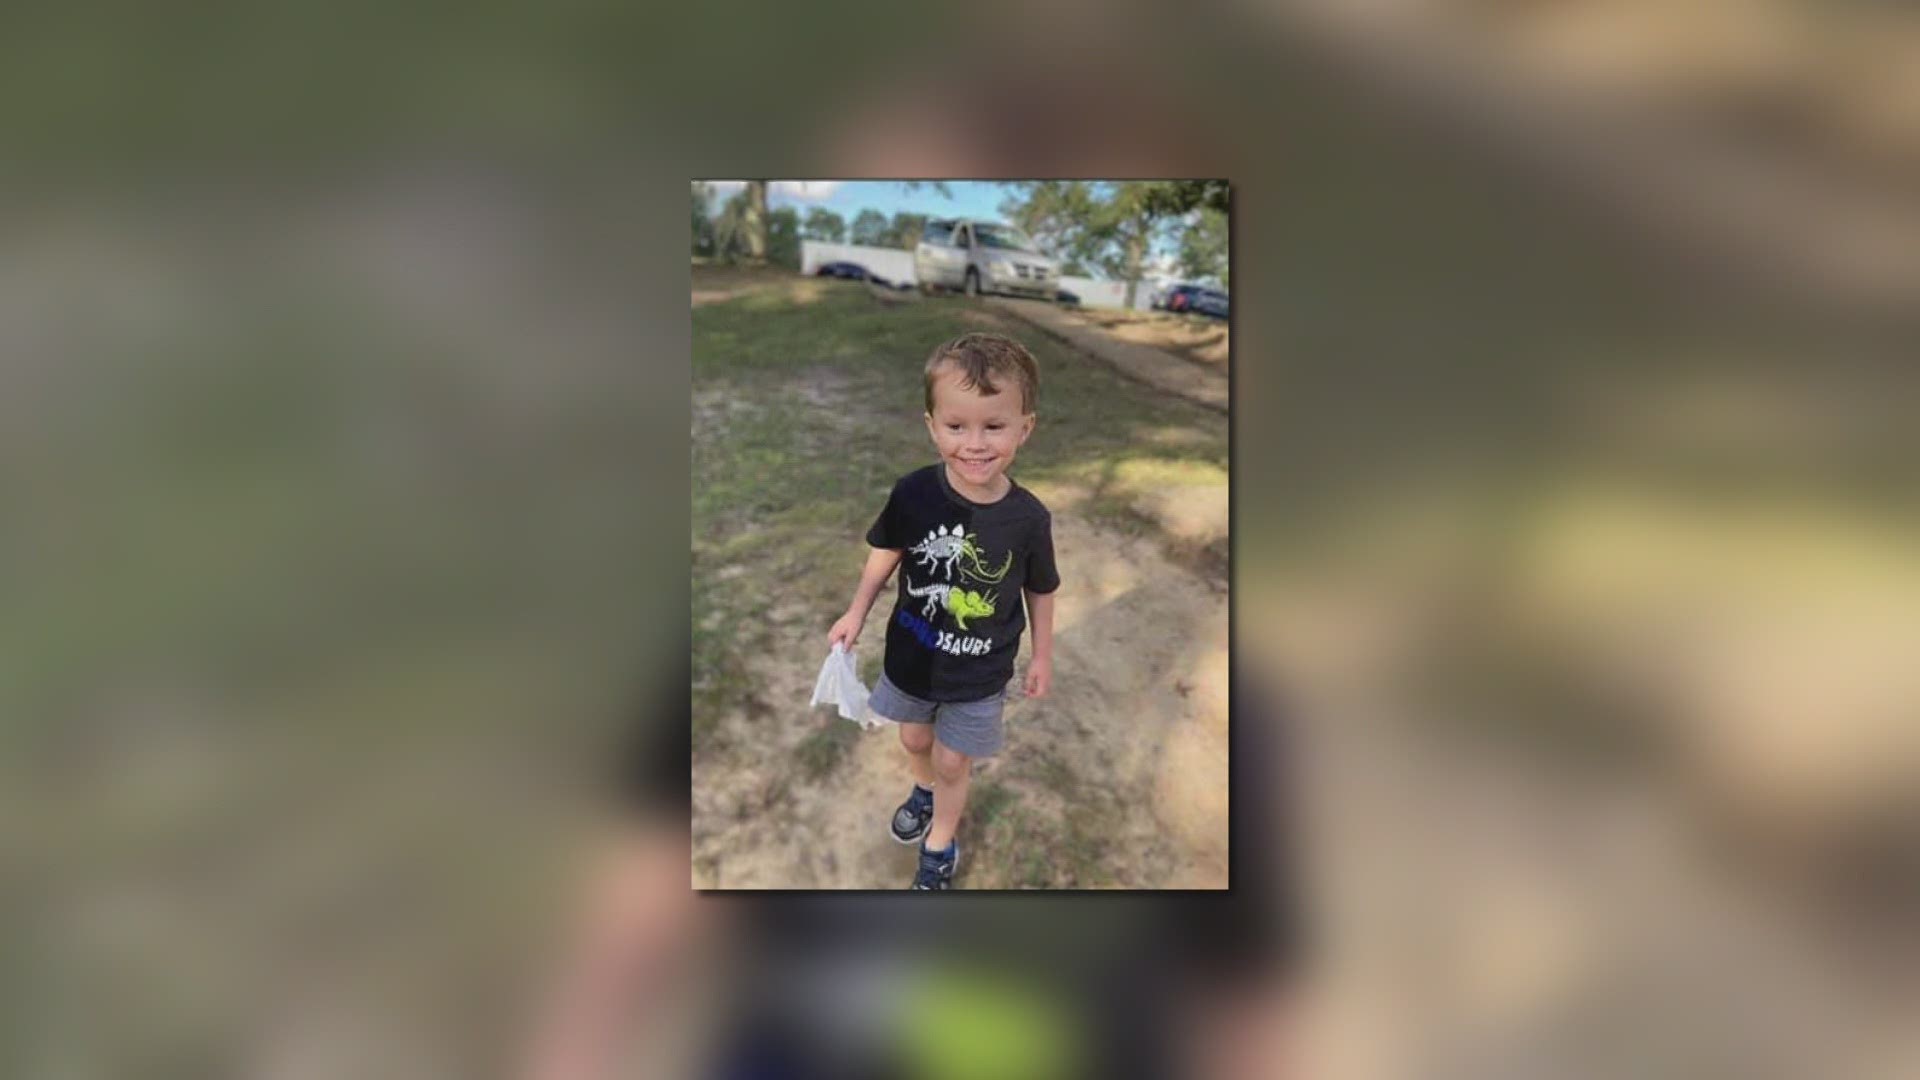 The family is in Jean Lafitte searching for a 4-year-old child that fell into the water Thursday afternoon. Officials said the boy is special needs.